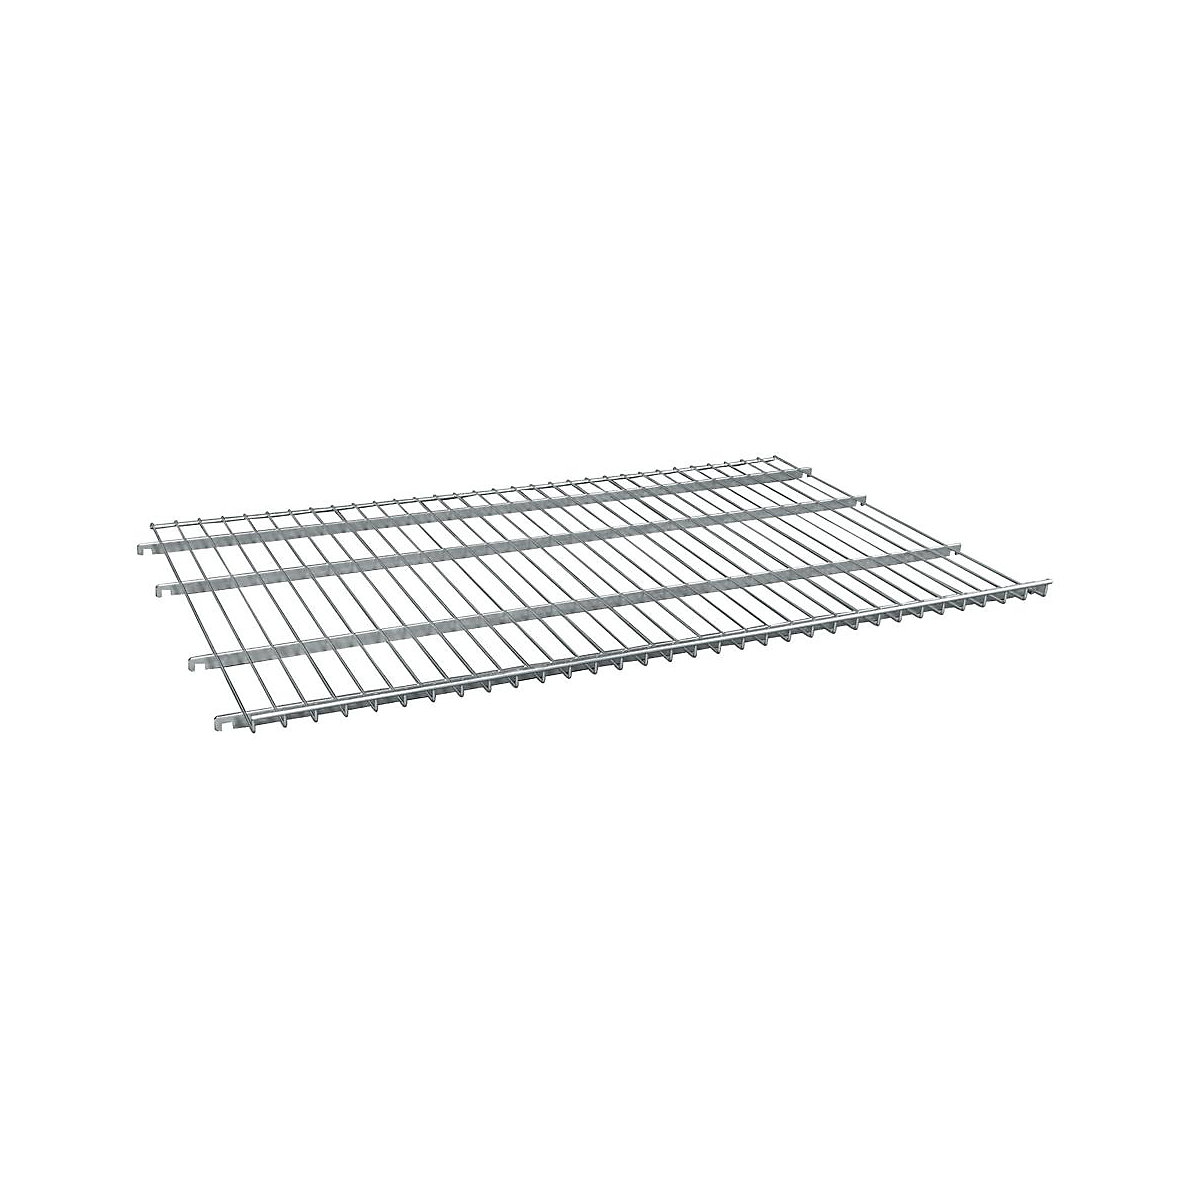 Intermediate shelf for steel roll container, for WxD 800 x 1200 mm, with 20 mm raised edges